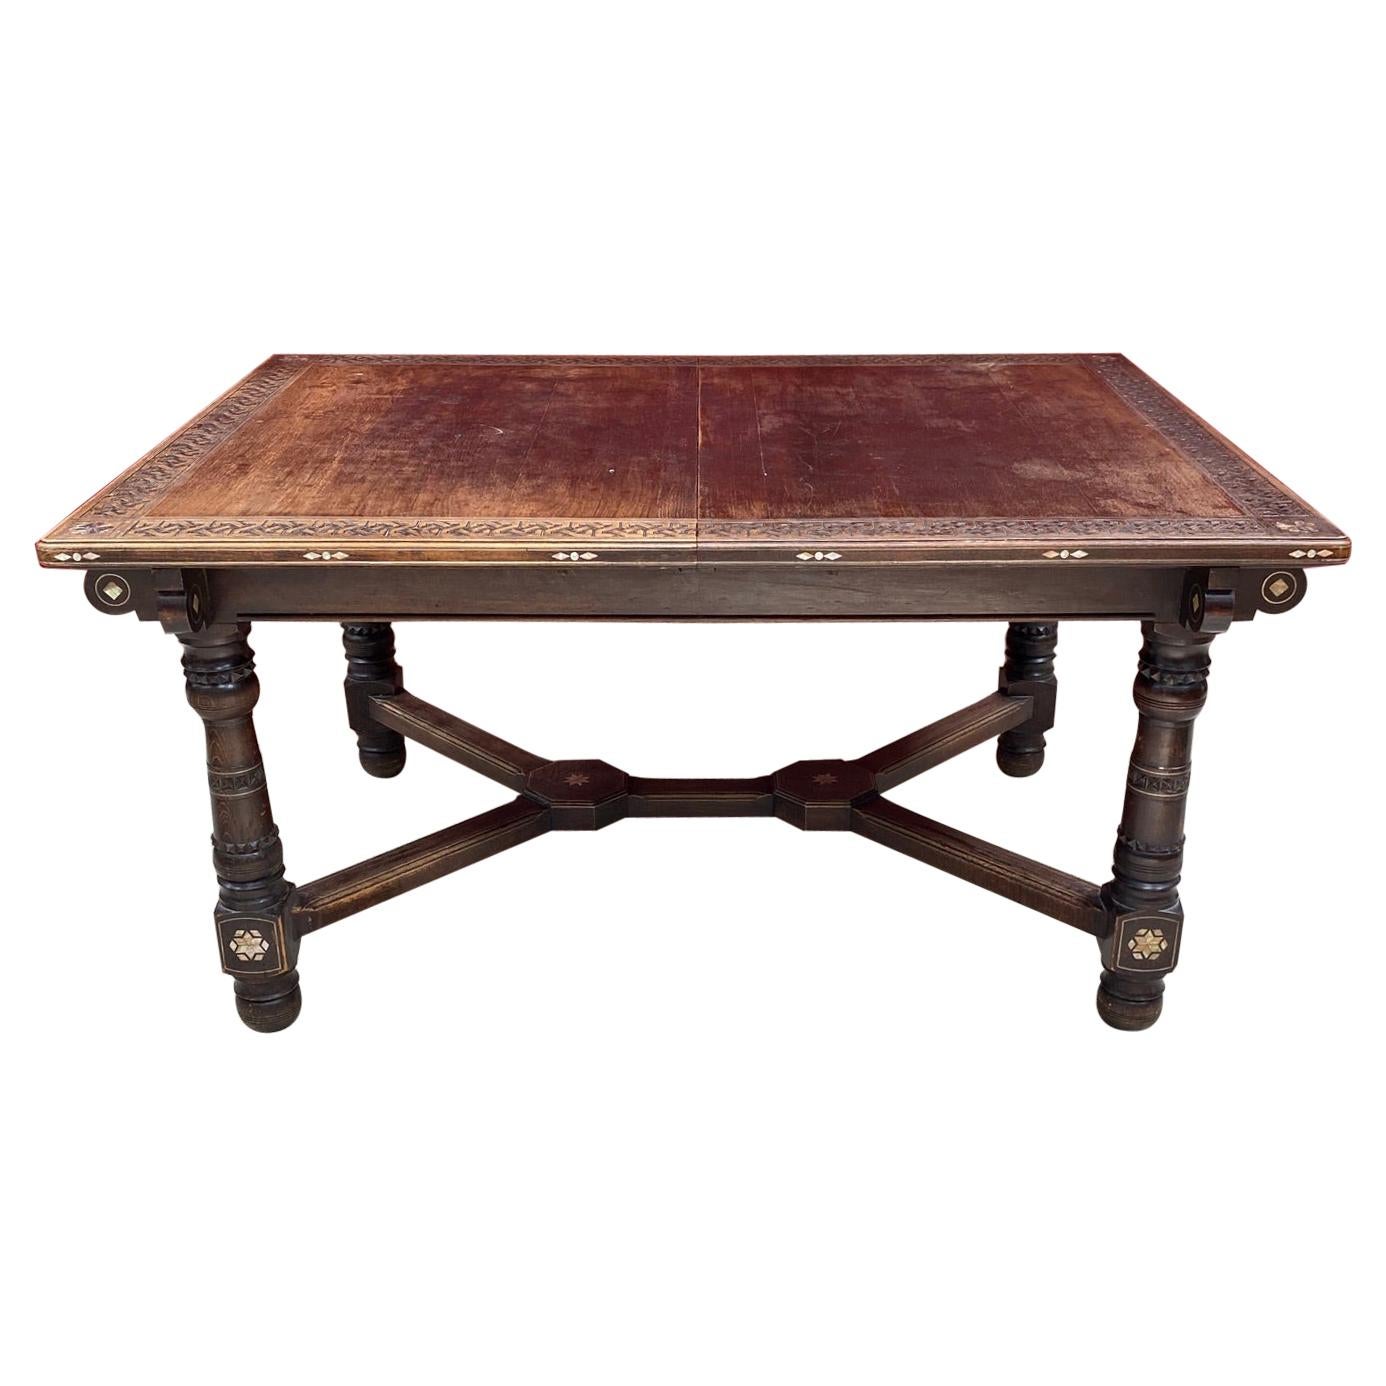 Oriental-Style Table in Carved Wood, with Mother-of-Pearl Inlay, 1880 For Sale